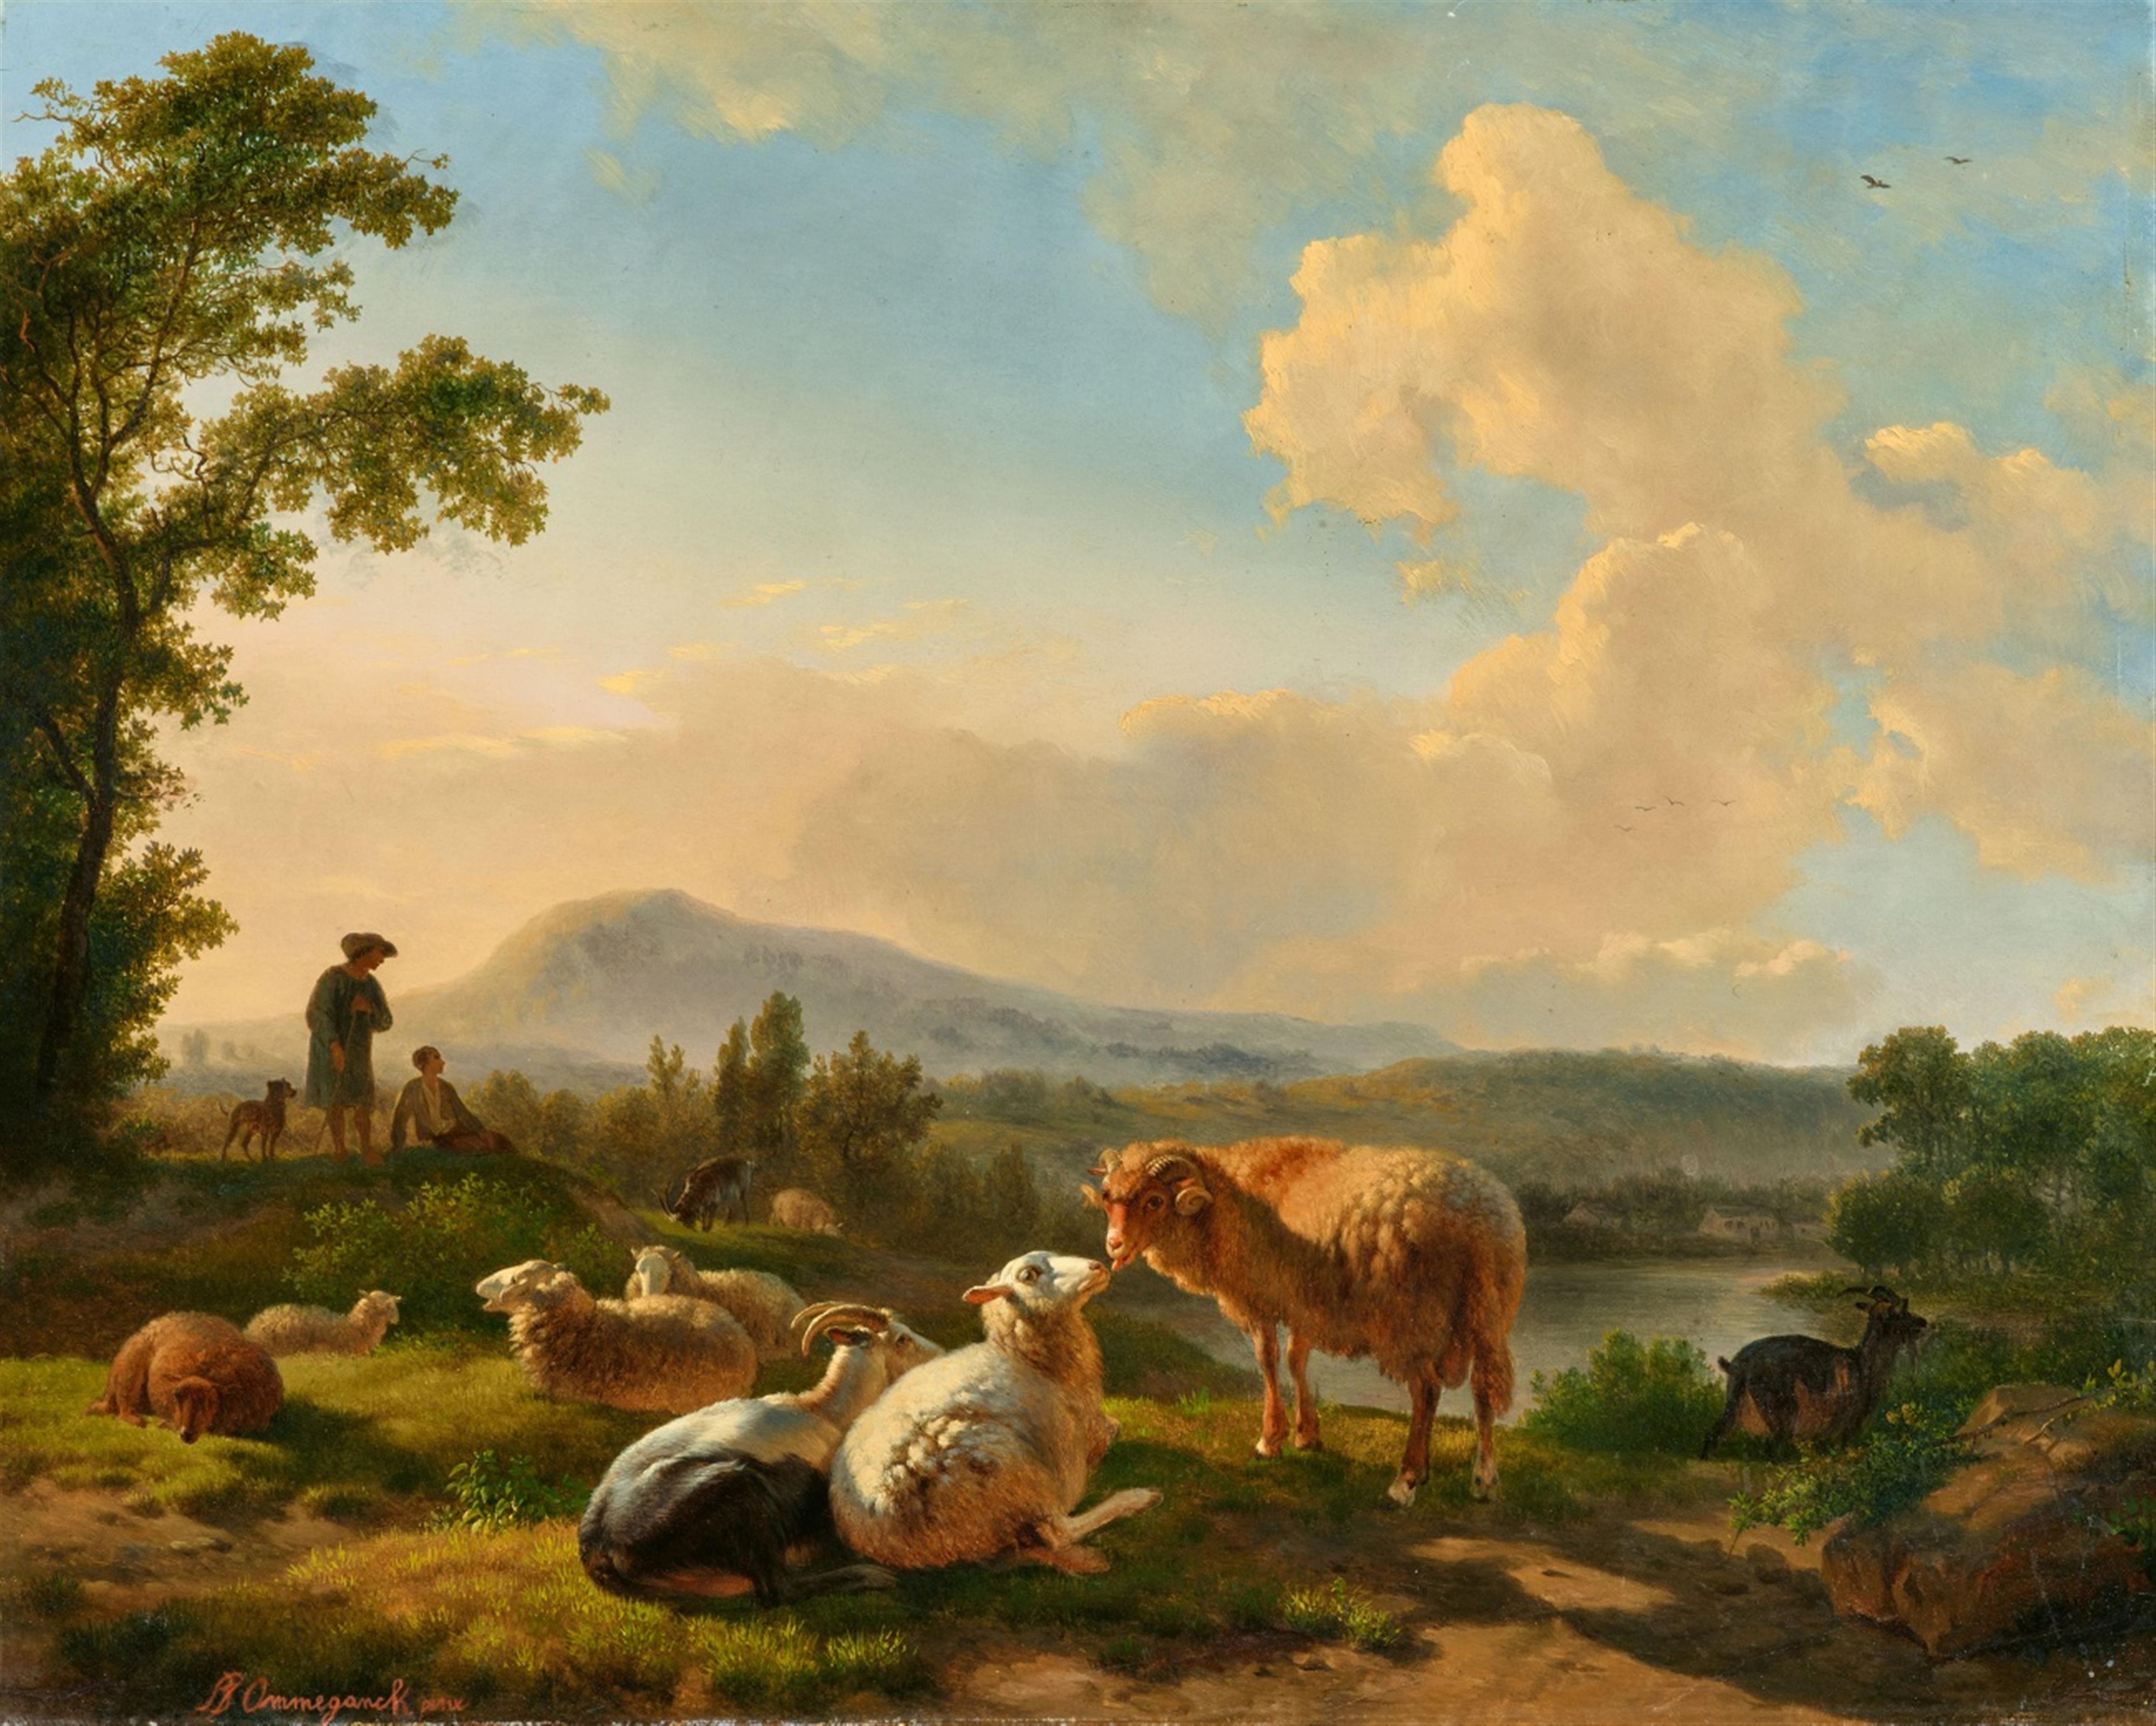 Balthasar Paul Ommeganck - Landscape with Shepherds and their Flocks - image-1